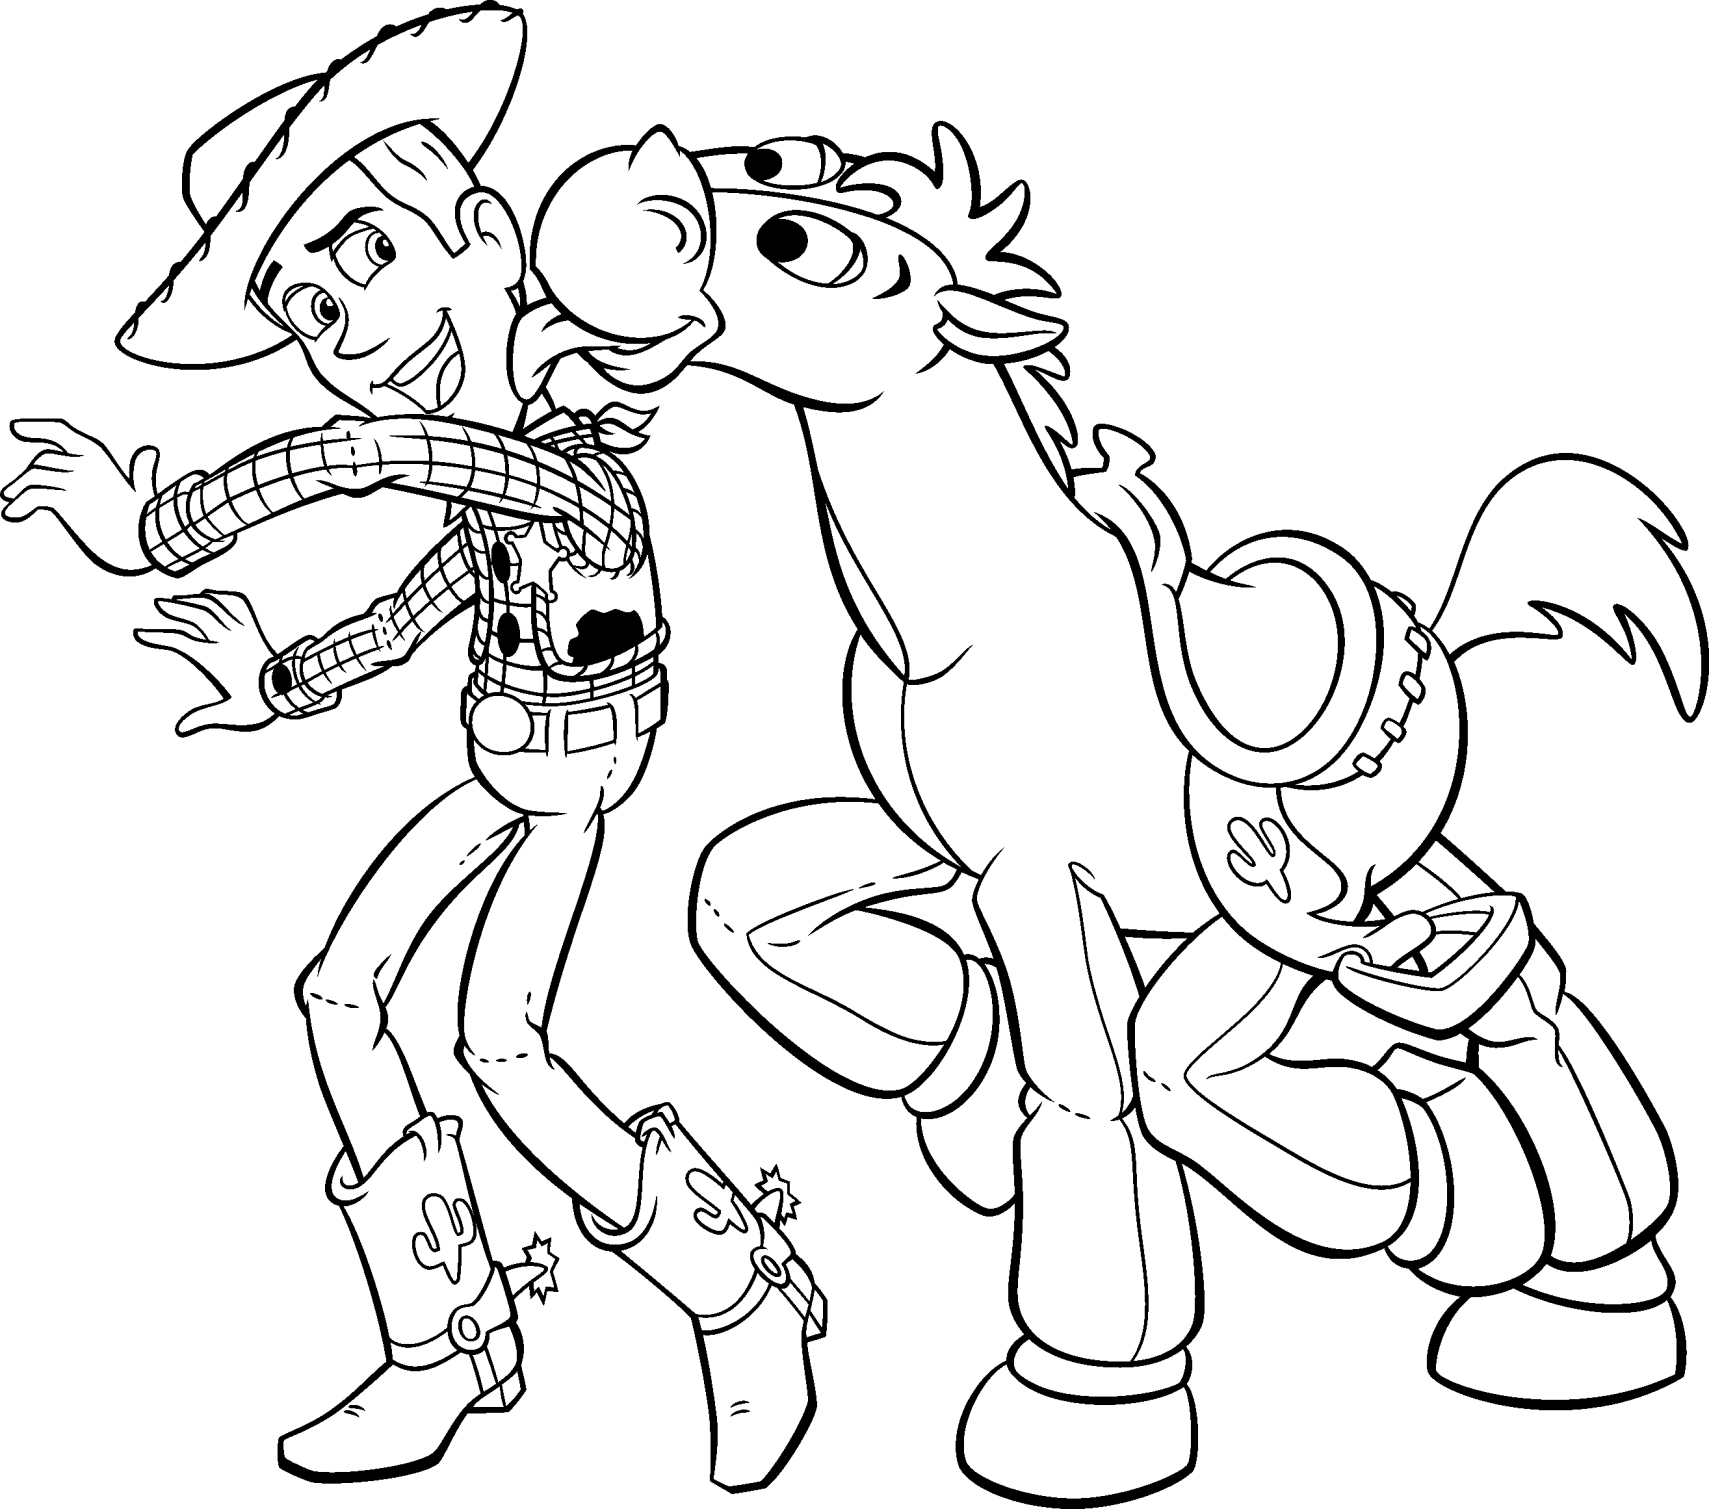 Cartoon Coloring Pages (1) Coloring Kids - Coloring Kids